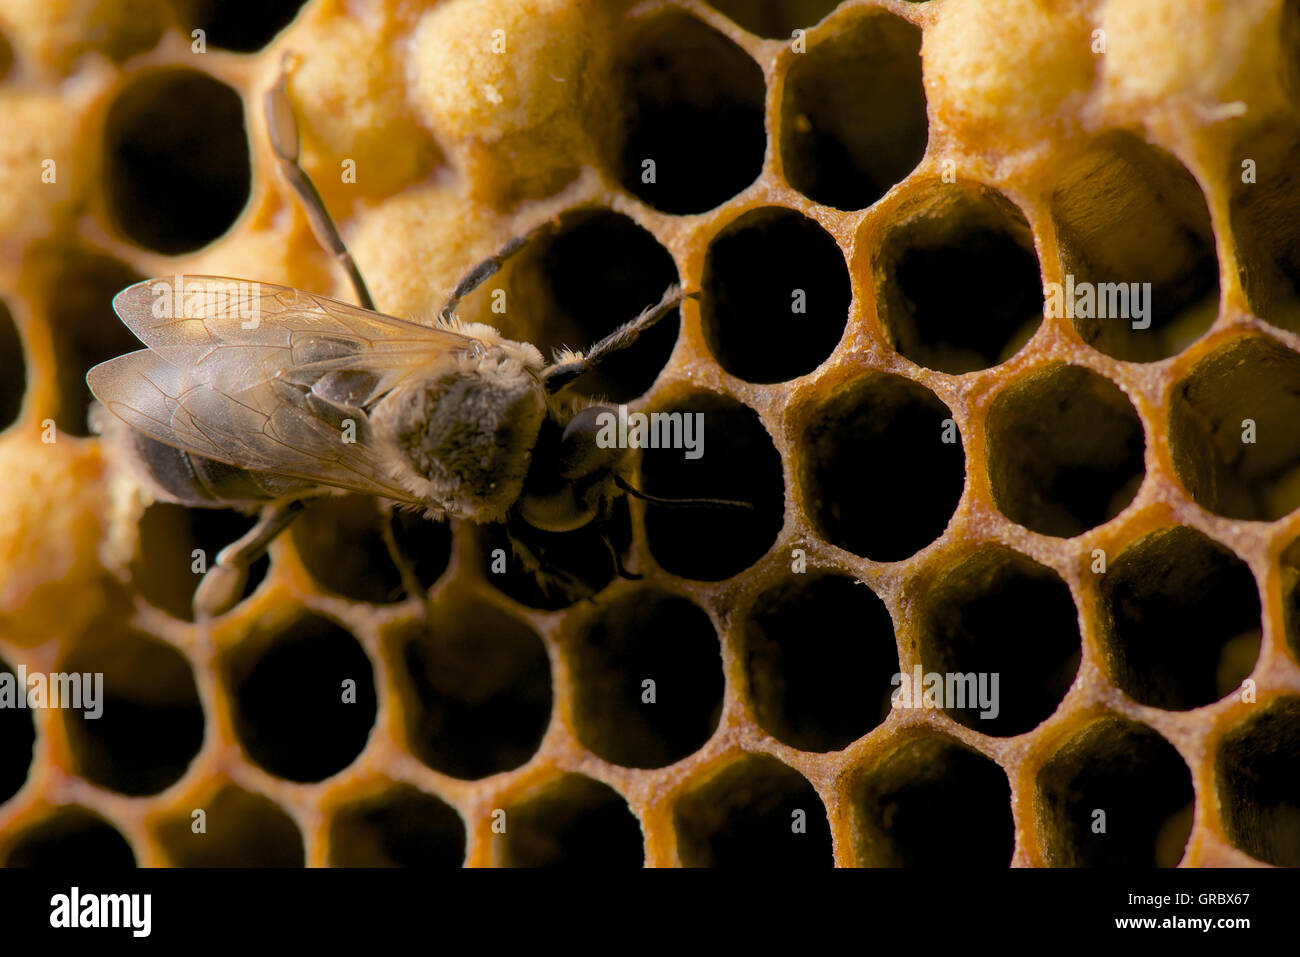 Freshly Emerged Drone Male On Cells Of A Honeycomb Stock Photo